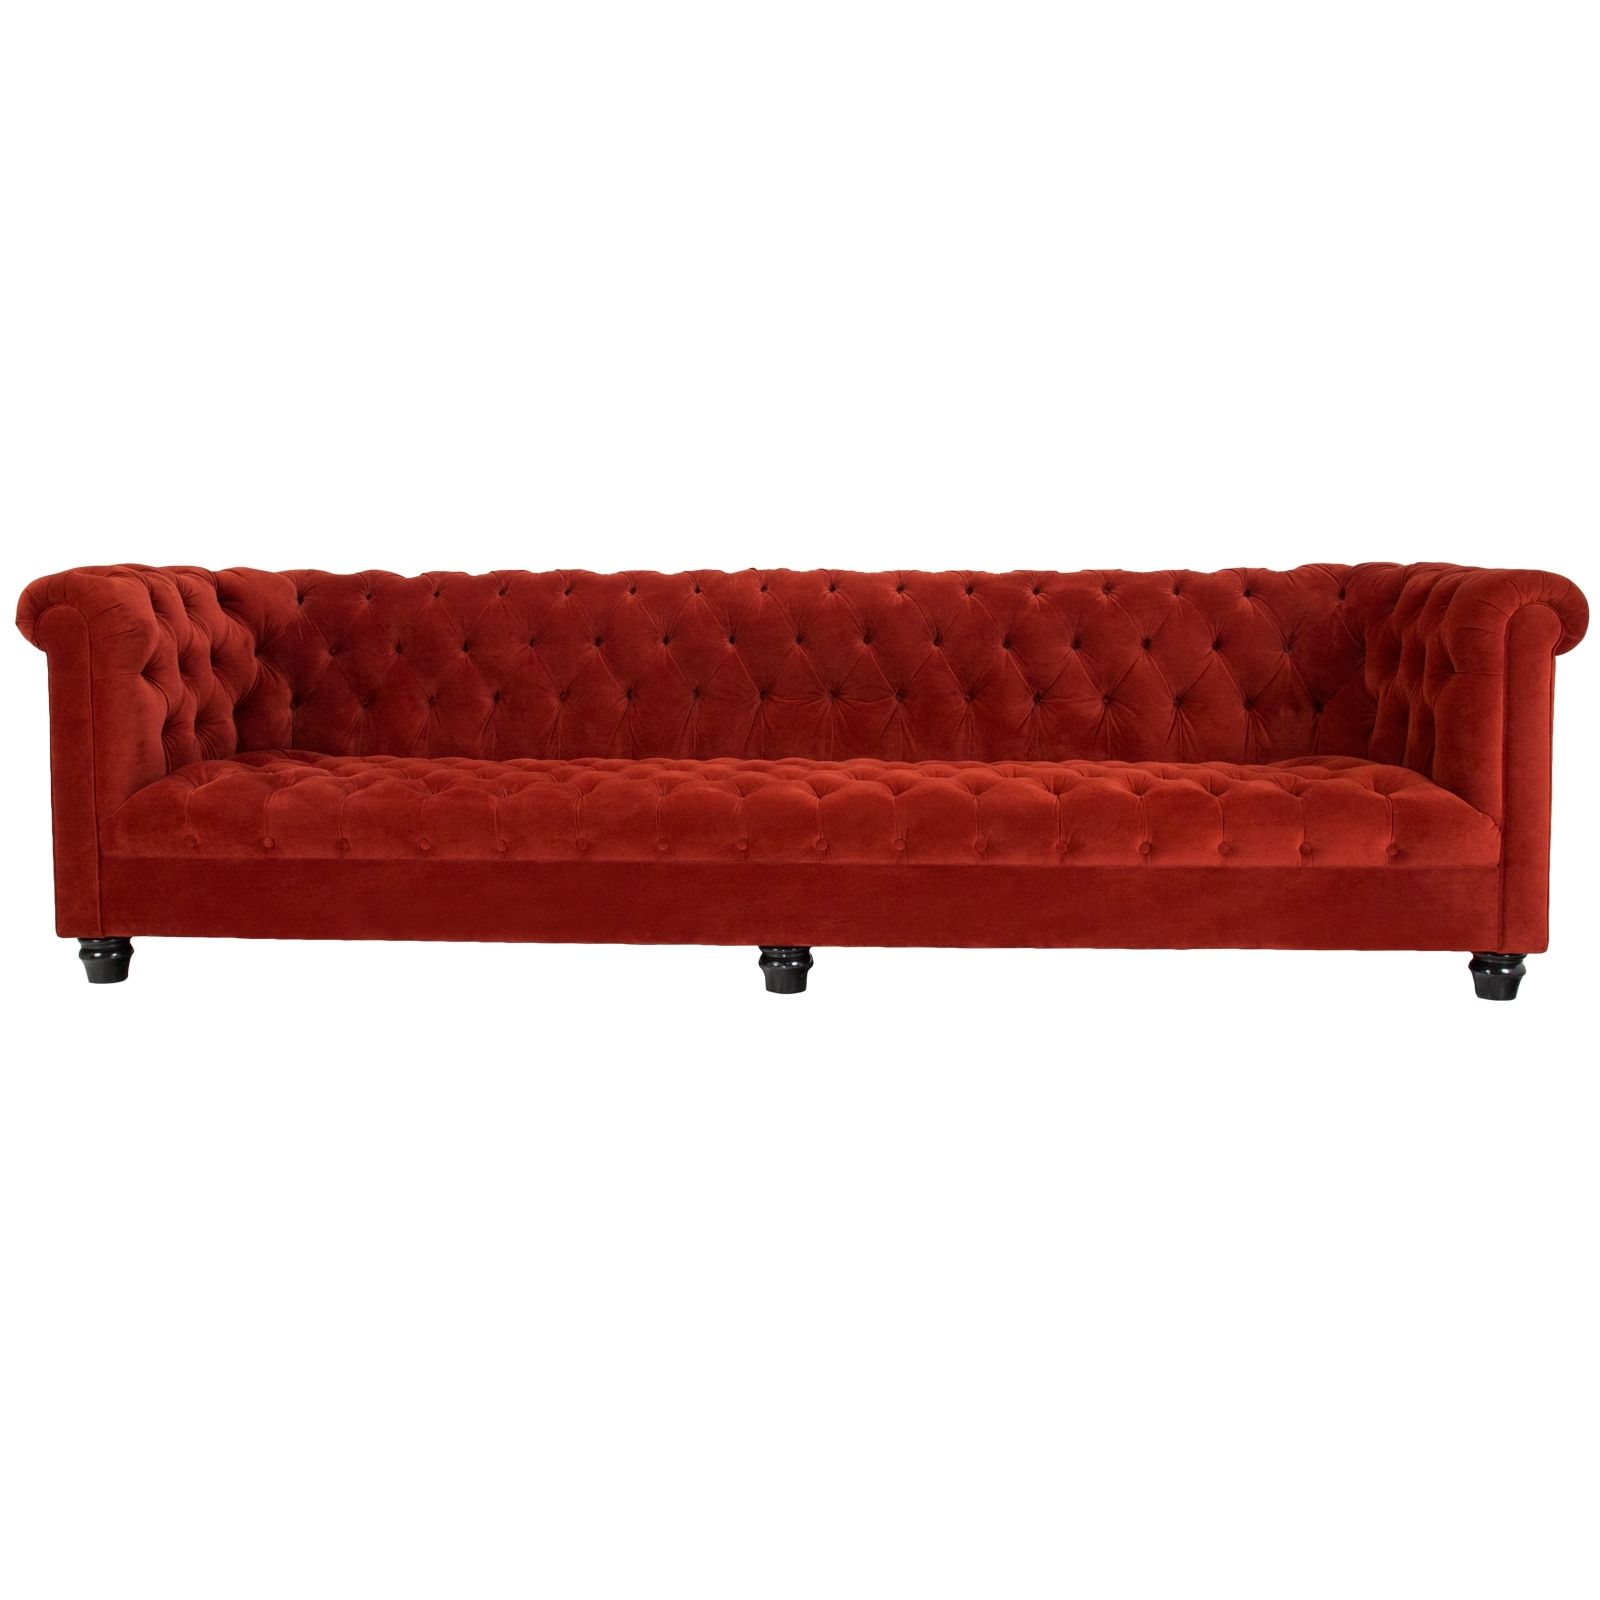 Well Known Manchester Sofas Within Tufted Sofa Rentals (View 11 of 20)